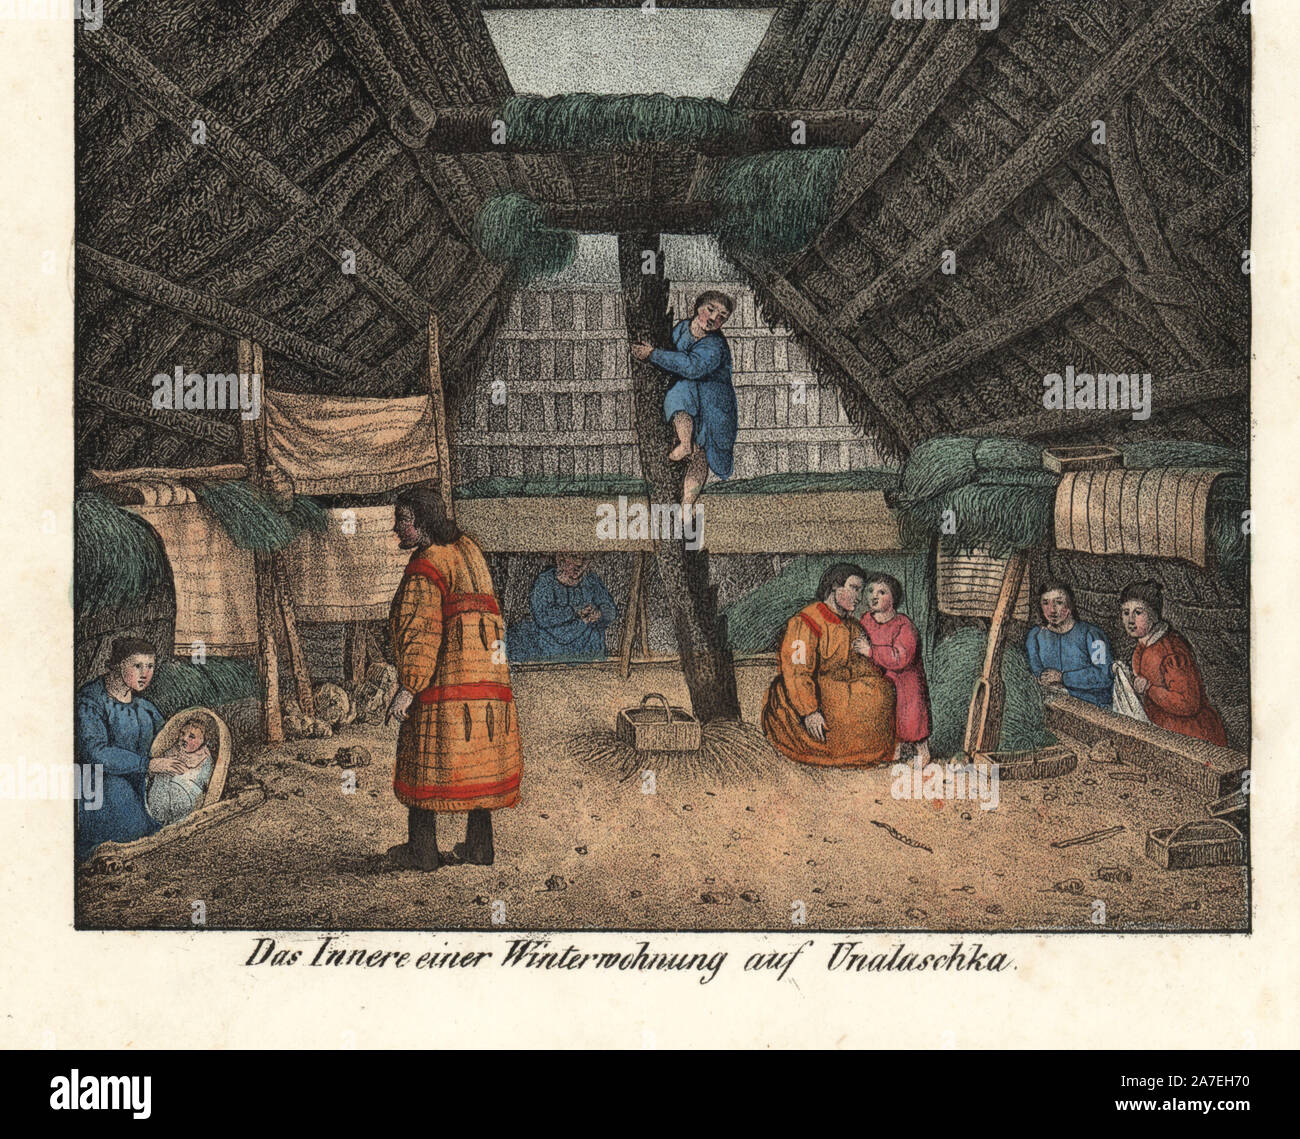 Inside an Aleut wooden winter house on the island of Unalaska. Men and women drying crops, sewing, and tending to children in papoose. Handcoloured lithograph from Friedrich Wilhelm Goedsche's 'Vollstaendige Völkergallerie in getreuen Abbildungen' (Complete Gallery of Peoples in True Pictures), Meissen, circa 1835-1840. Goedsche (1785-1863) was a German writer, bookseller and publisher in Meissen. Many of the illustrations were adapted from Bertuch's 'Bilderbuch fur Kinder' and others. Stock Photo